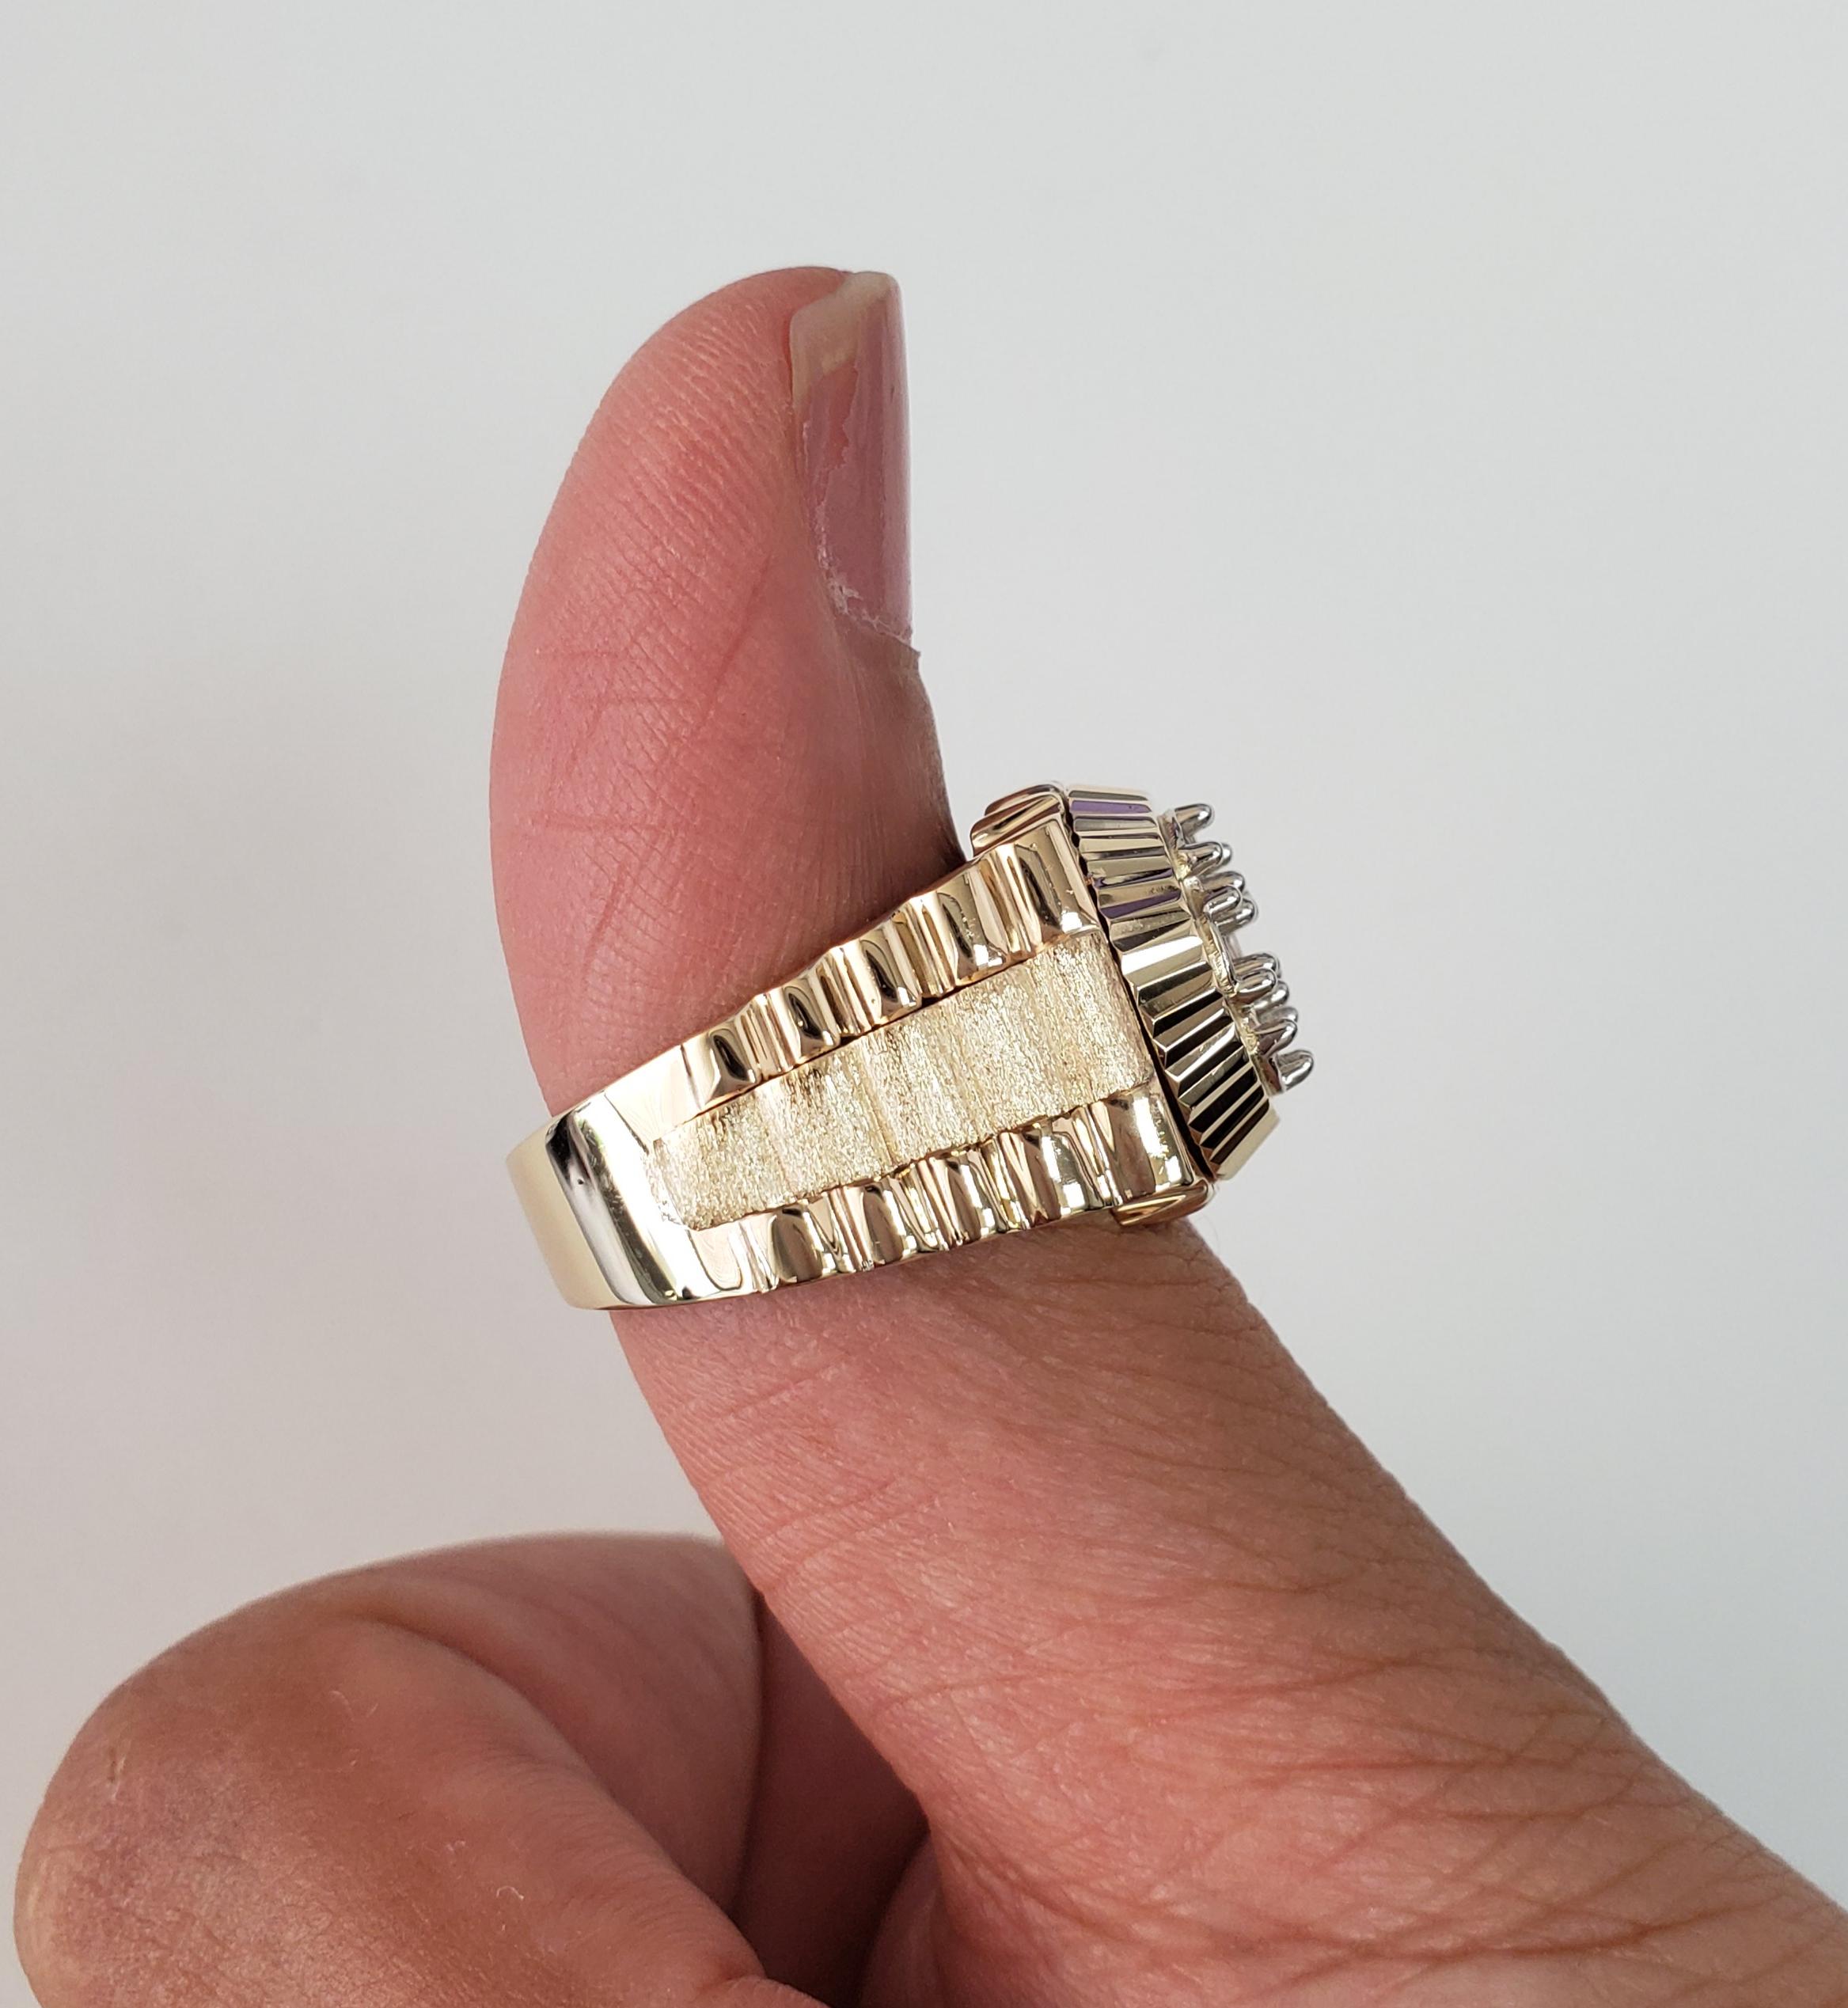 ♥ Product Summary ♥
 
Details: Fluted Bezel, Bark Center & Polished Sided band
Approx. Total Carat: 1.00cttw
Band Material: 14k Yellow Gold
Ring Weight: 11 - 14 grams
Total Stone Settings: 7